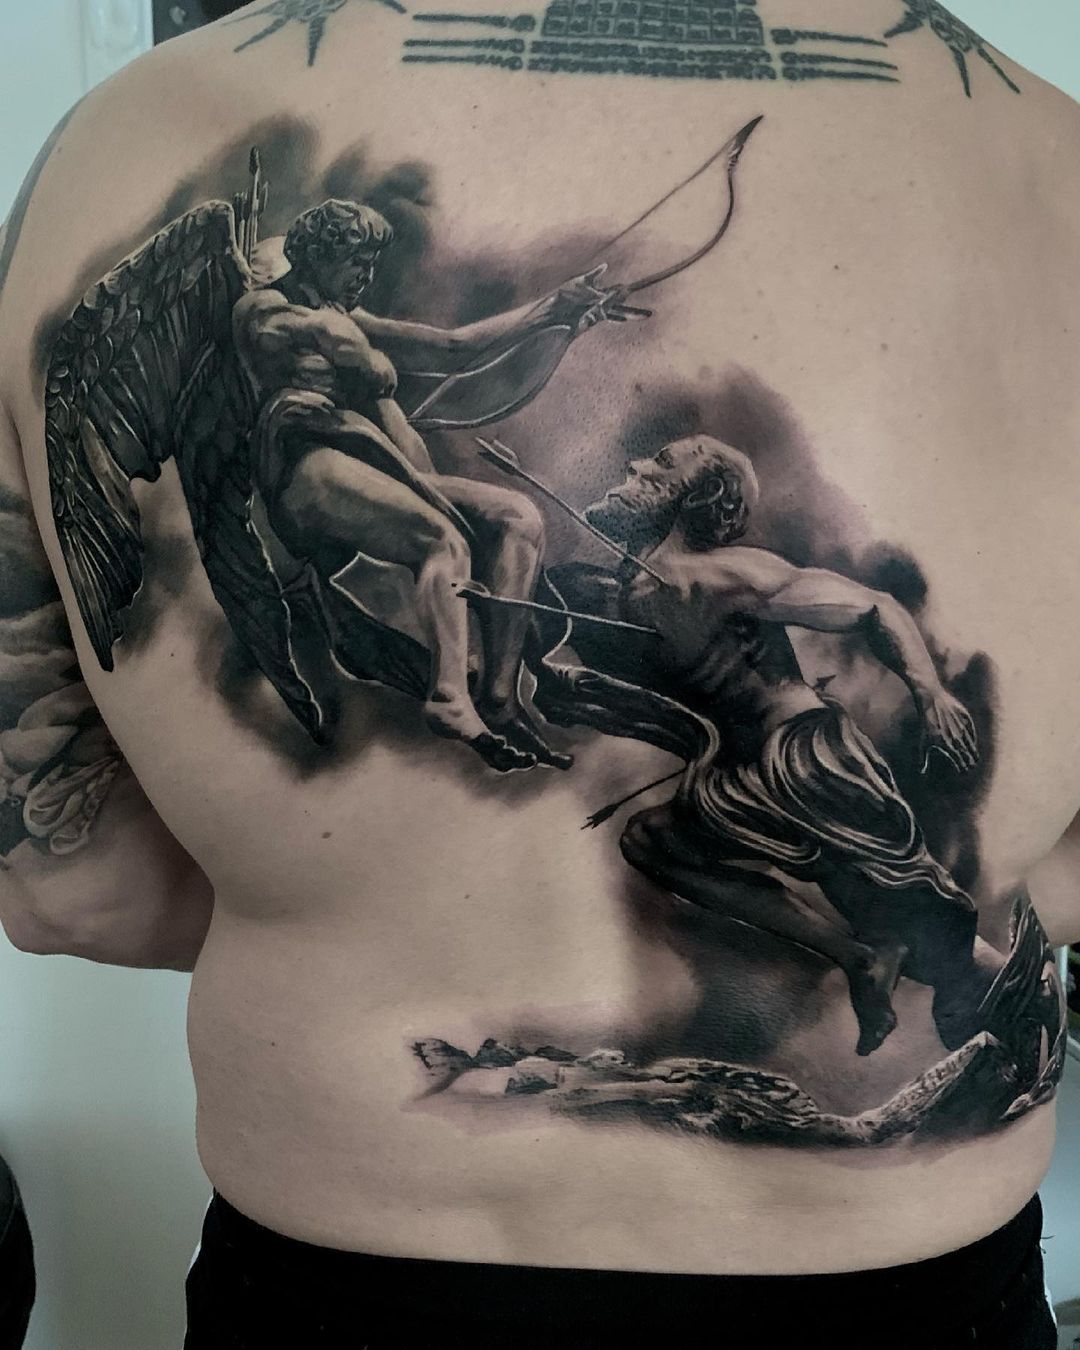 Tattoo uploaded by Leigh_tattoos • Outside section to a Greek Mythology  inspired sleeve. Insta: @leigh_tattoos Fb: leighstca Studio: @loco_tattoo  Sponsored by: @heliostattoo @h2oceanloyalty . . . #goldcoast #tattoo # tattoos #tat #inspirationtattoo ...